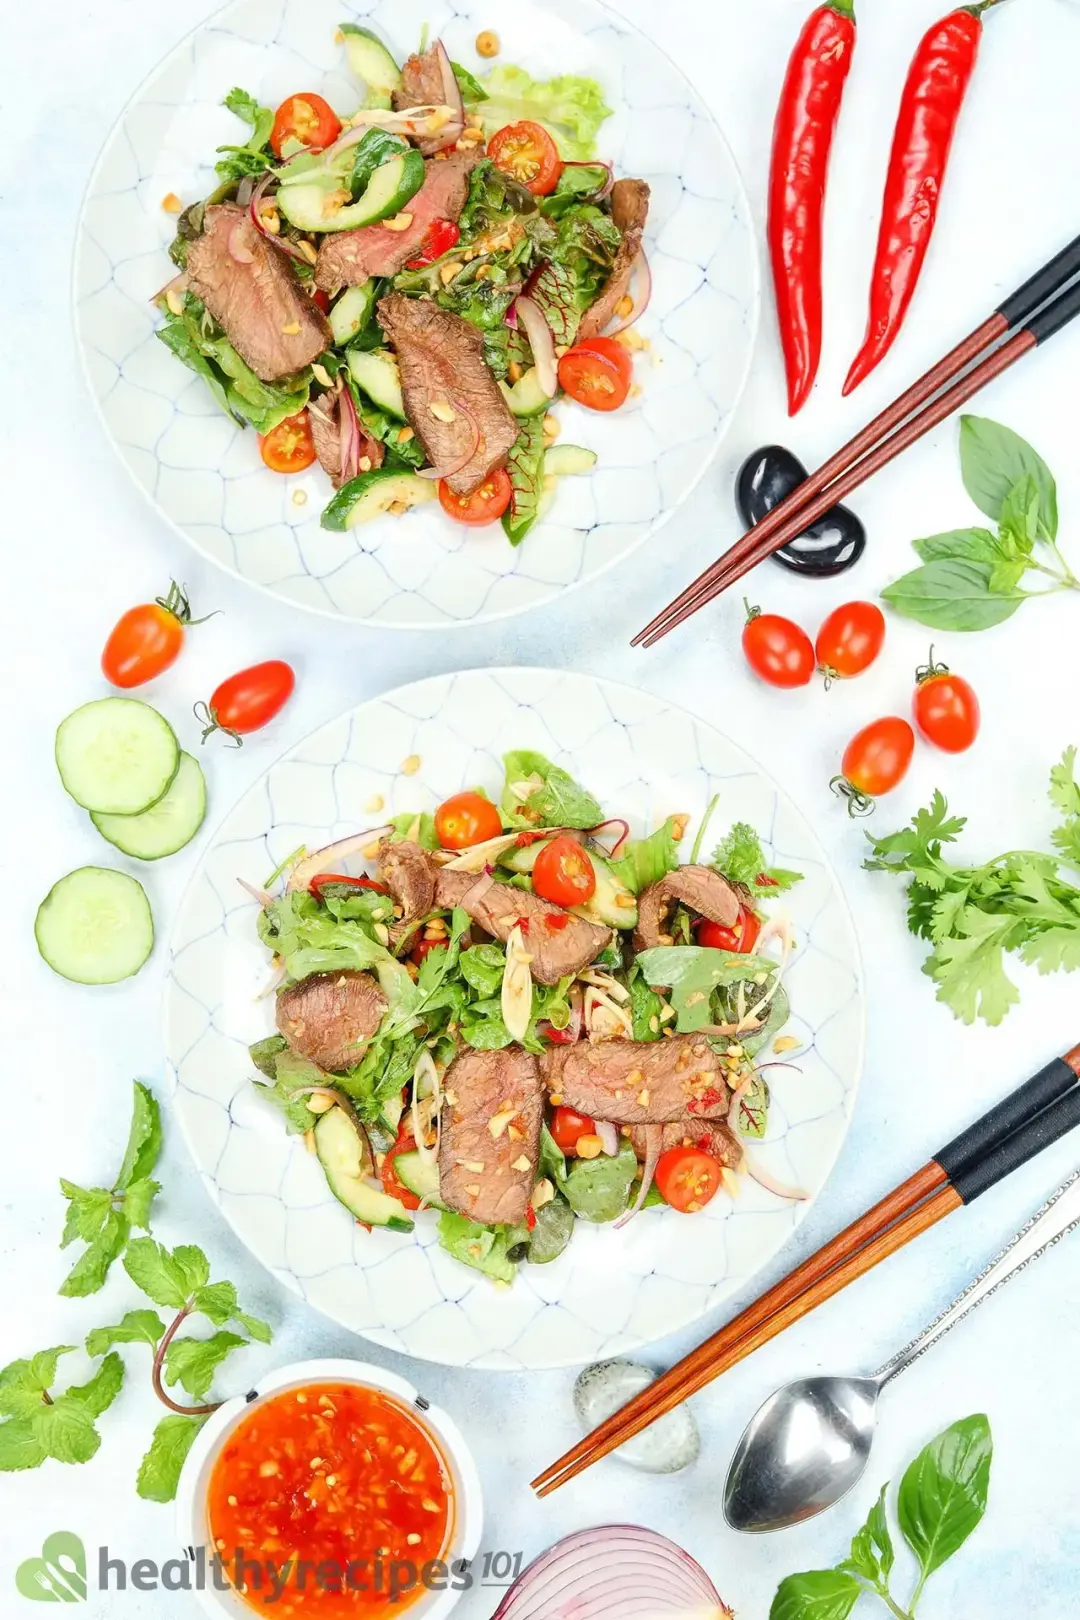 How to Store Thai Beef Salad